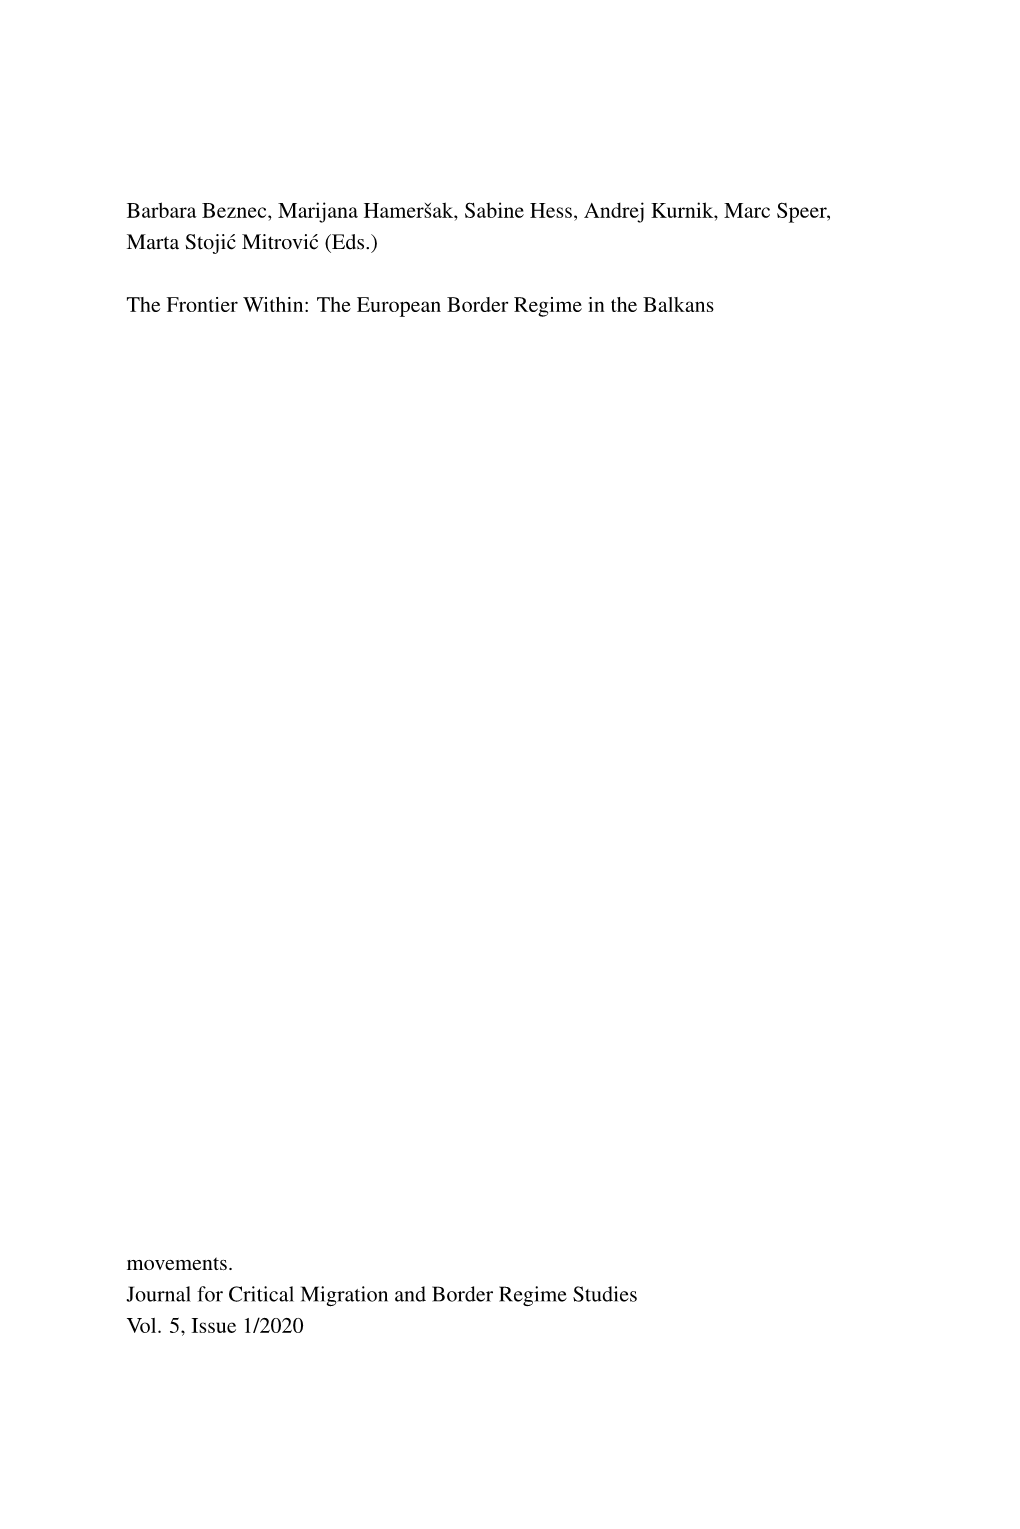 The Frontier Within: the European Border Regime in the Balkans